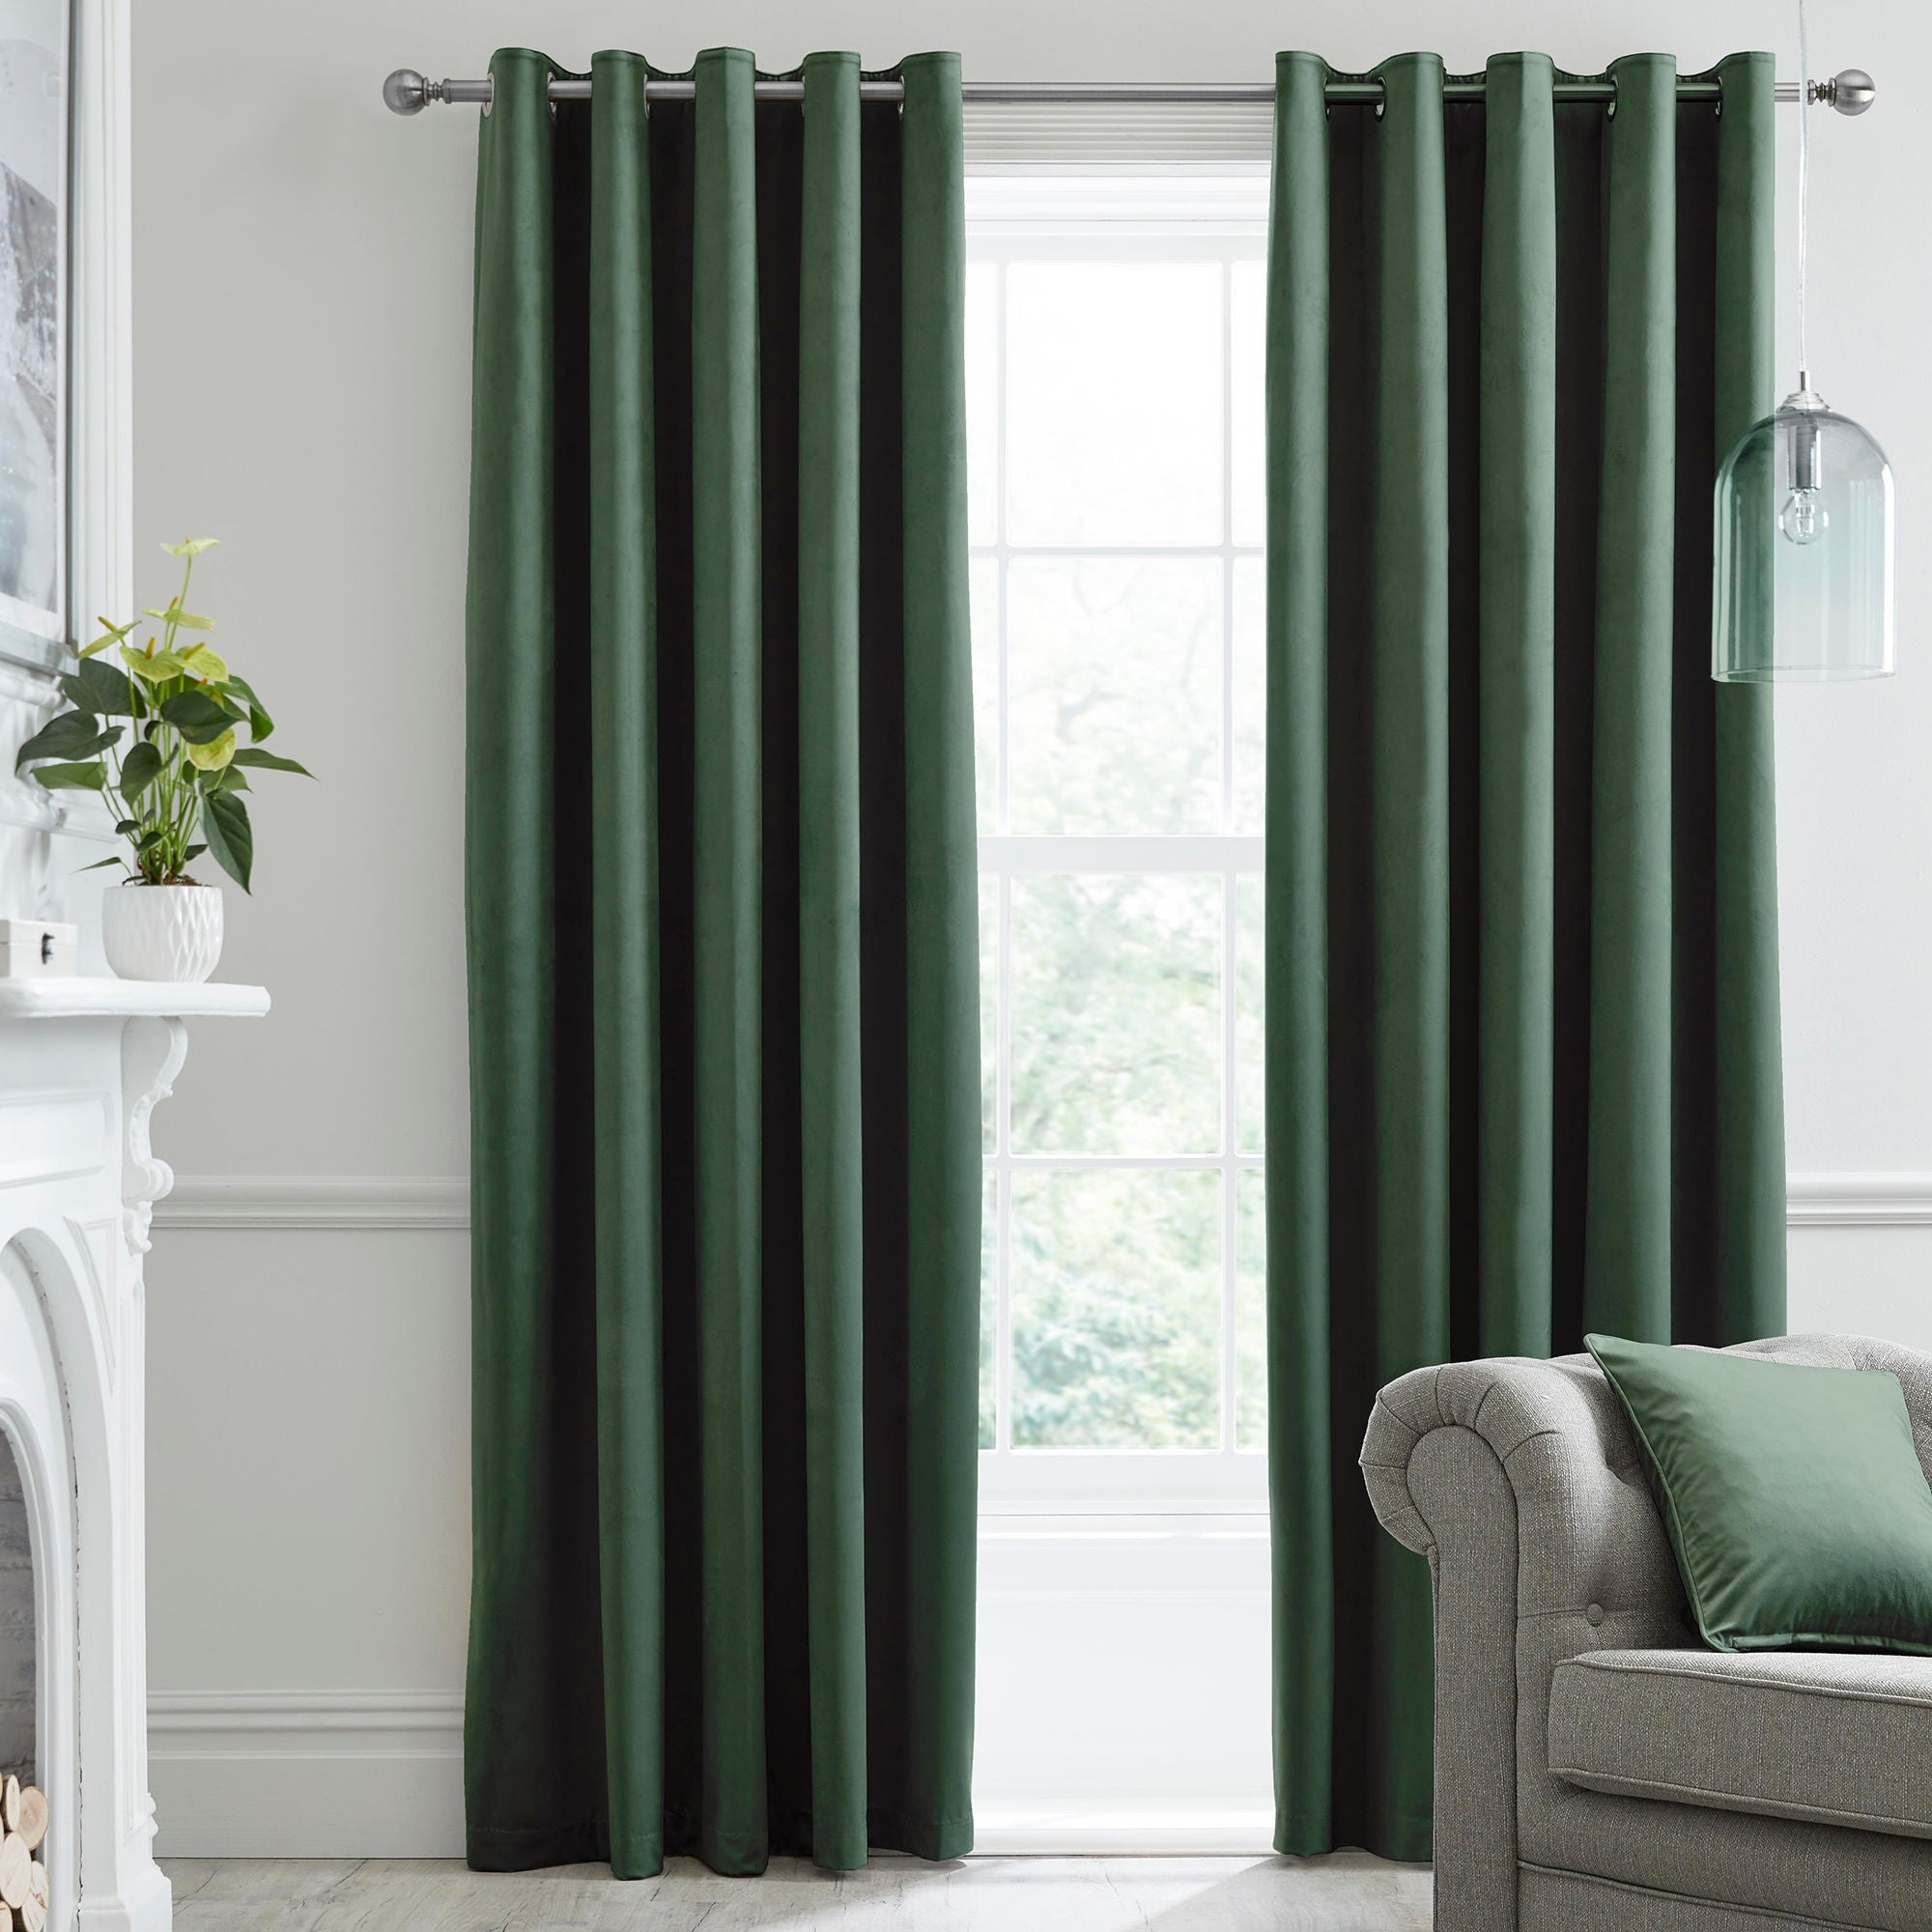 Montrose Pair of Eyelet Curtains by Laurence Llewelyn-Bowen in Bottle Green - Pair of Eyelet Curtains - Laurence Llewelyn-Bowen